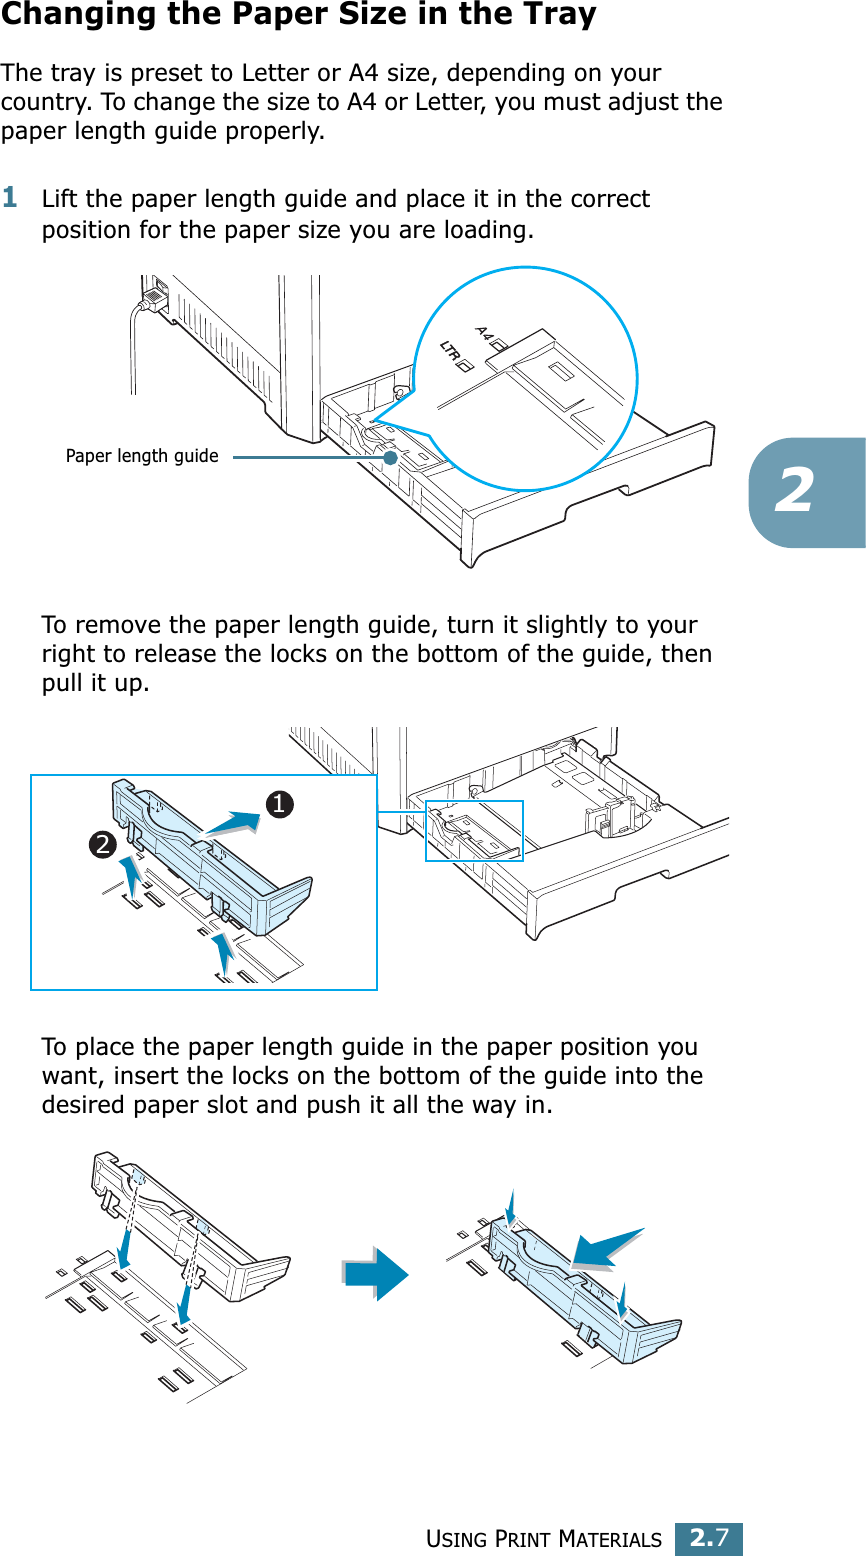 USING PRINT MATERIALS2.72Changing the Paper Size in the TrayThe tray is preset to Letter or A4 size, depending on your country. To change the size to A4 or Letter, you must adjust the paper length guide properly.1Lift the paper length guide and place it in the correct position for the paper size you are loading.To remove the paper length guide, turn it slightly to your right to release the locks on the bottom of the guide, then pull it up. To place the paper length guide in the paper position you want, insert the locks on the bottom of the guide into the desired paper slot and push it all the way in. Paper length guide12